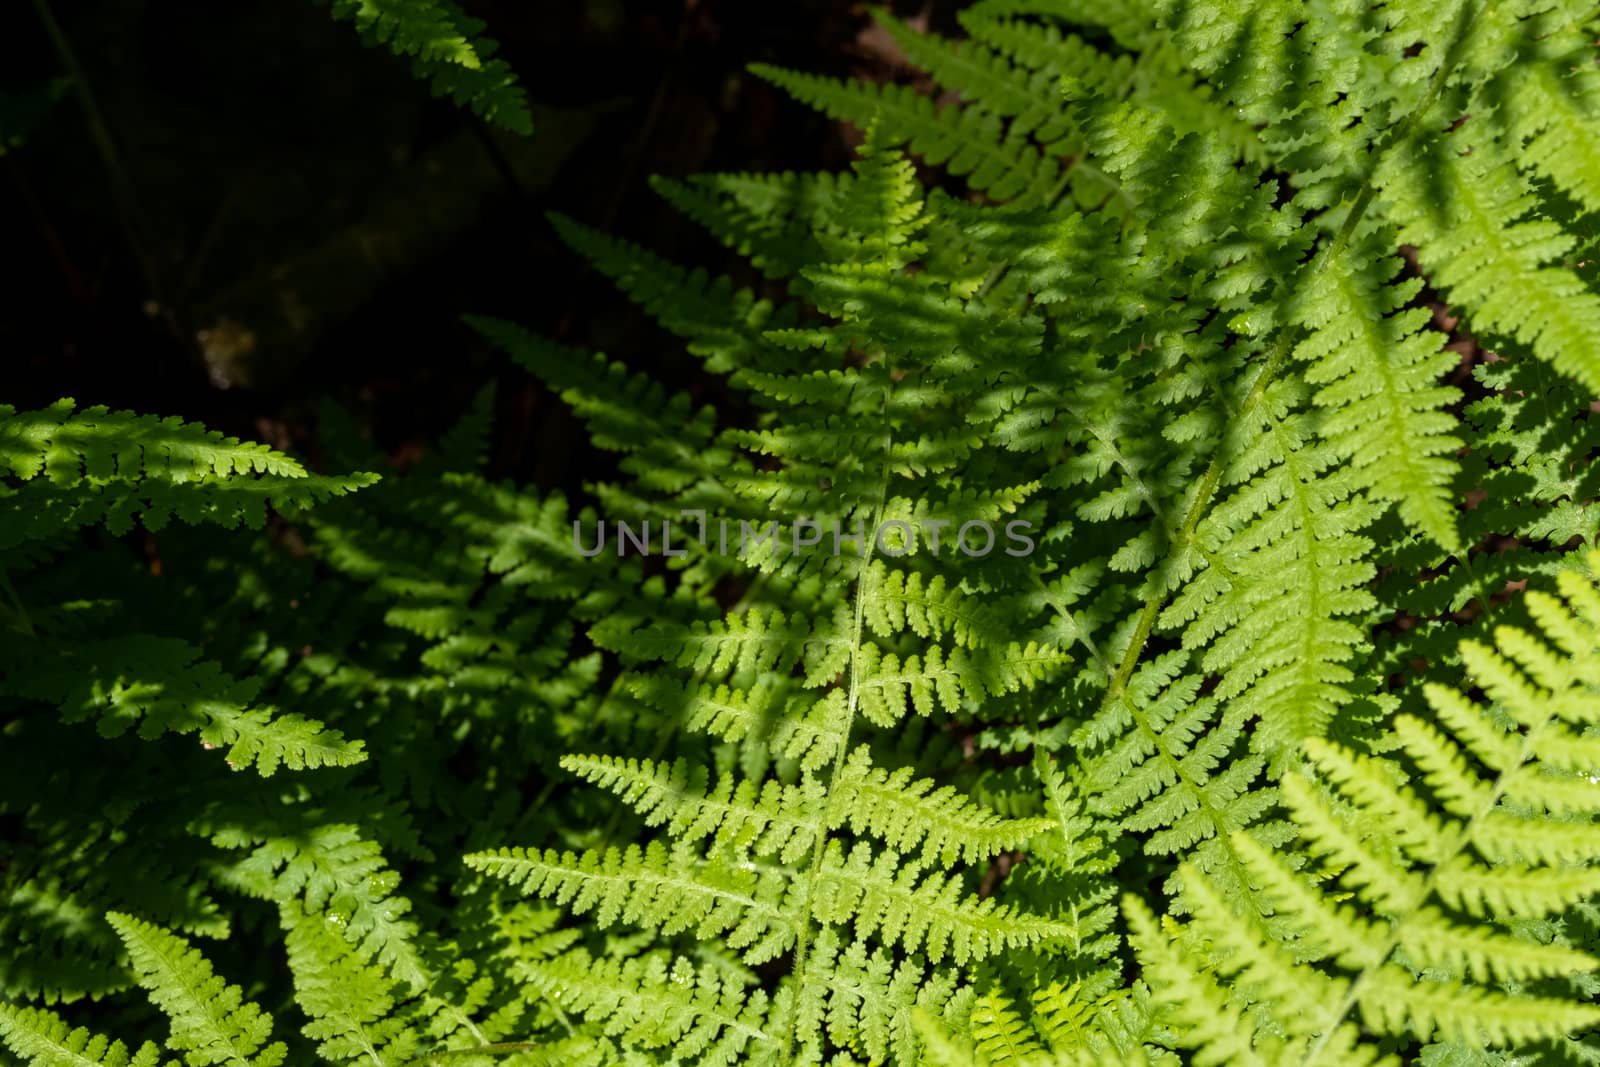 Overhead View of Ferns and Their Shadows by colintemple